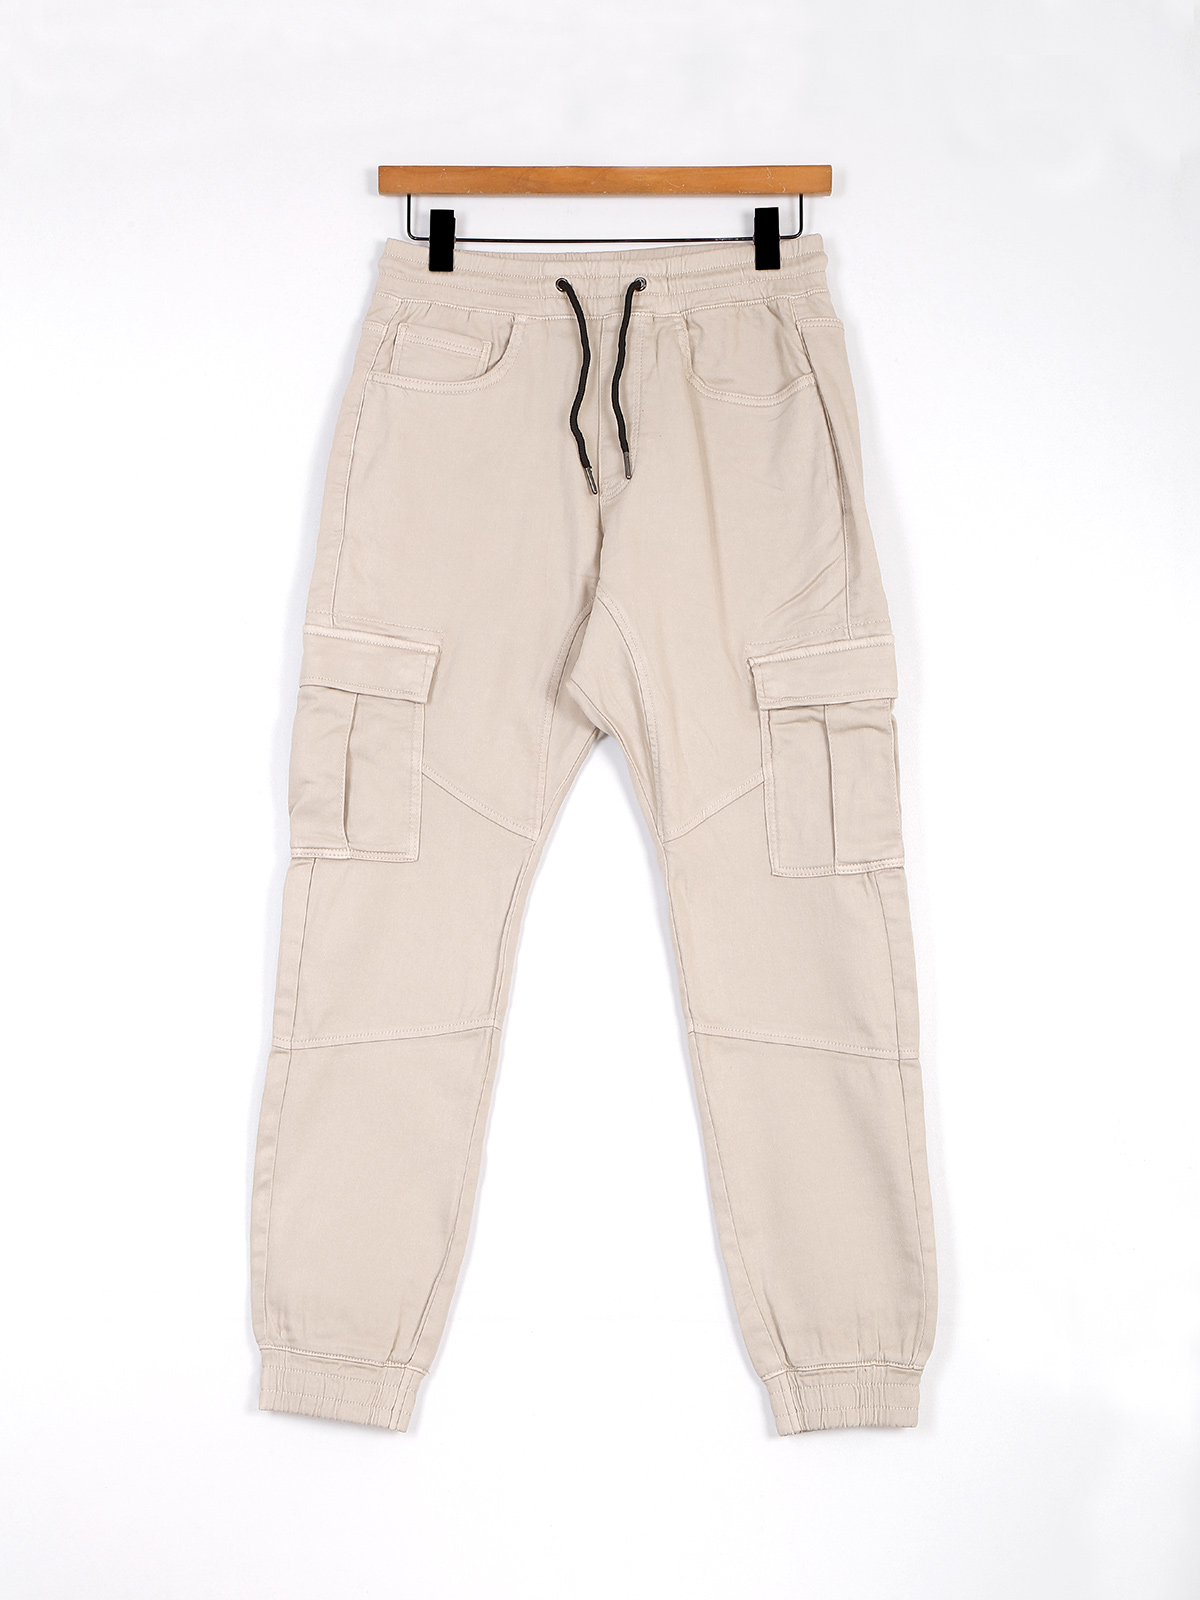 Buy Olive Green Trousers & Pants for Men by DNMX Online | Ajio.com